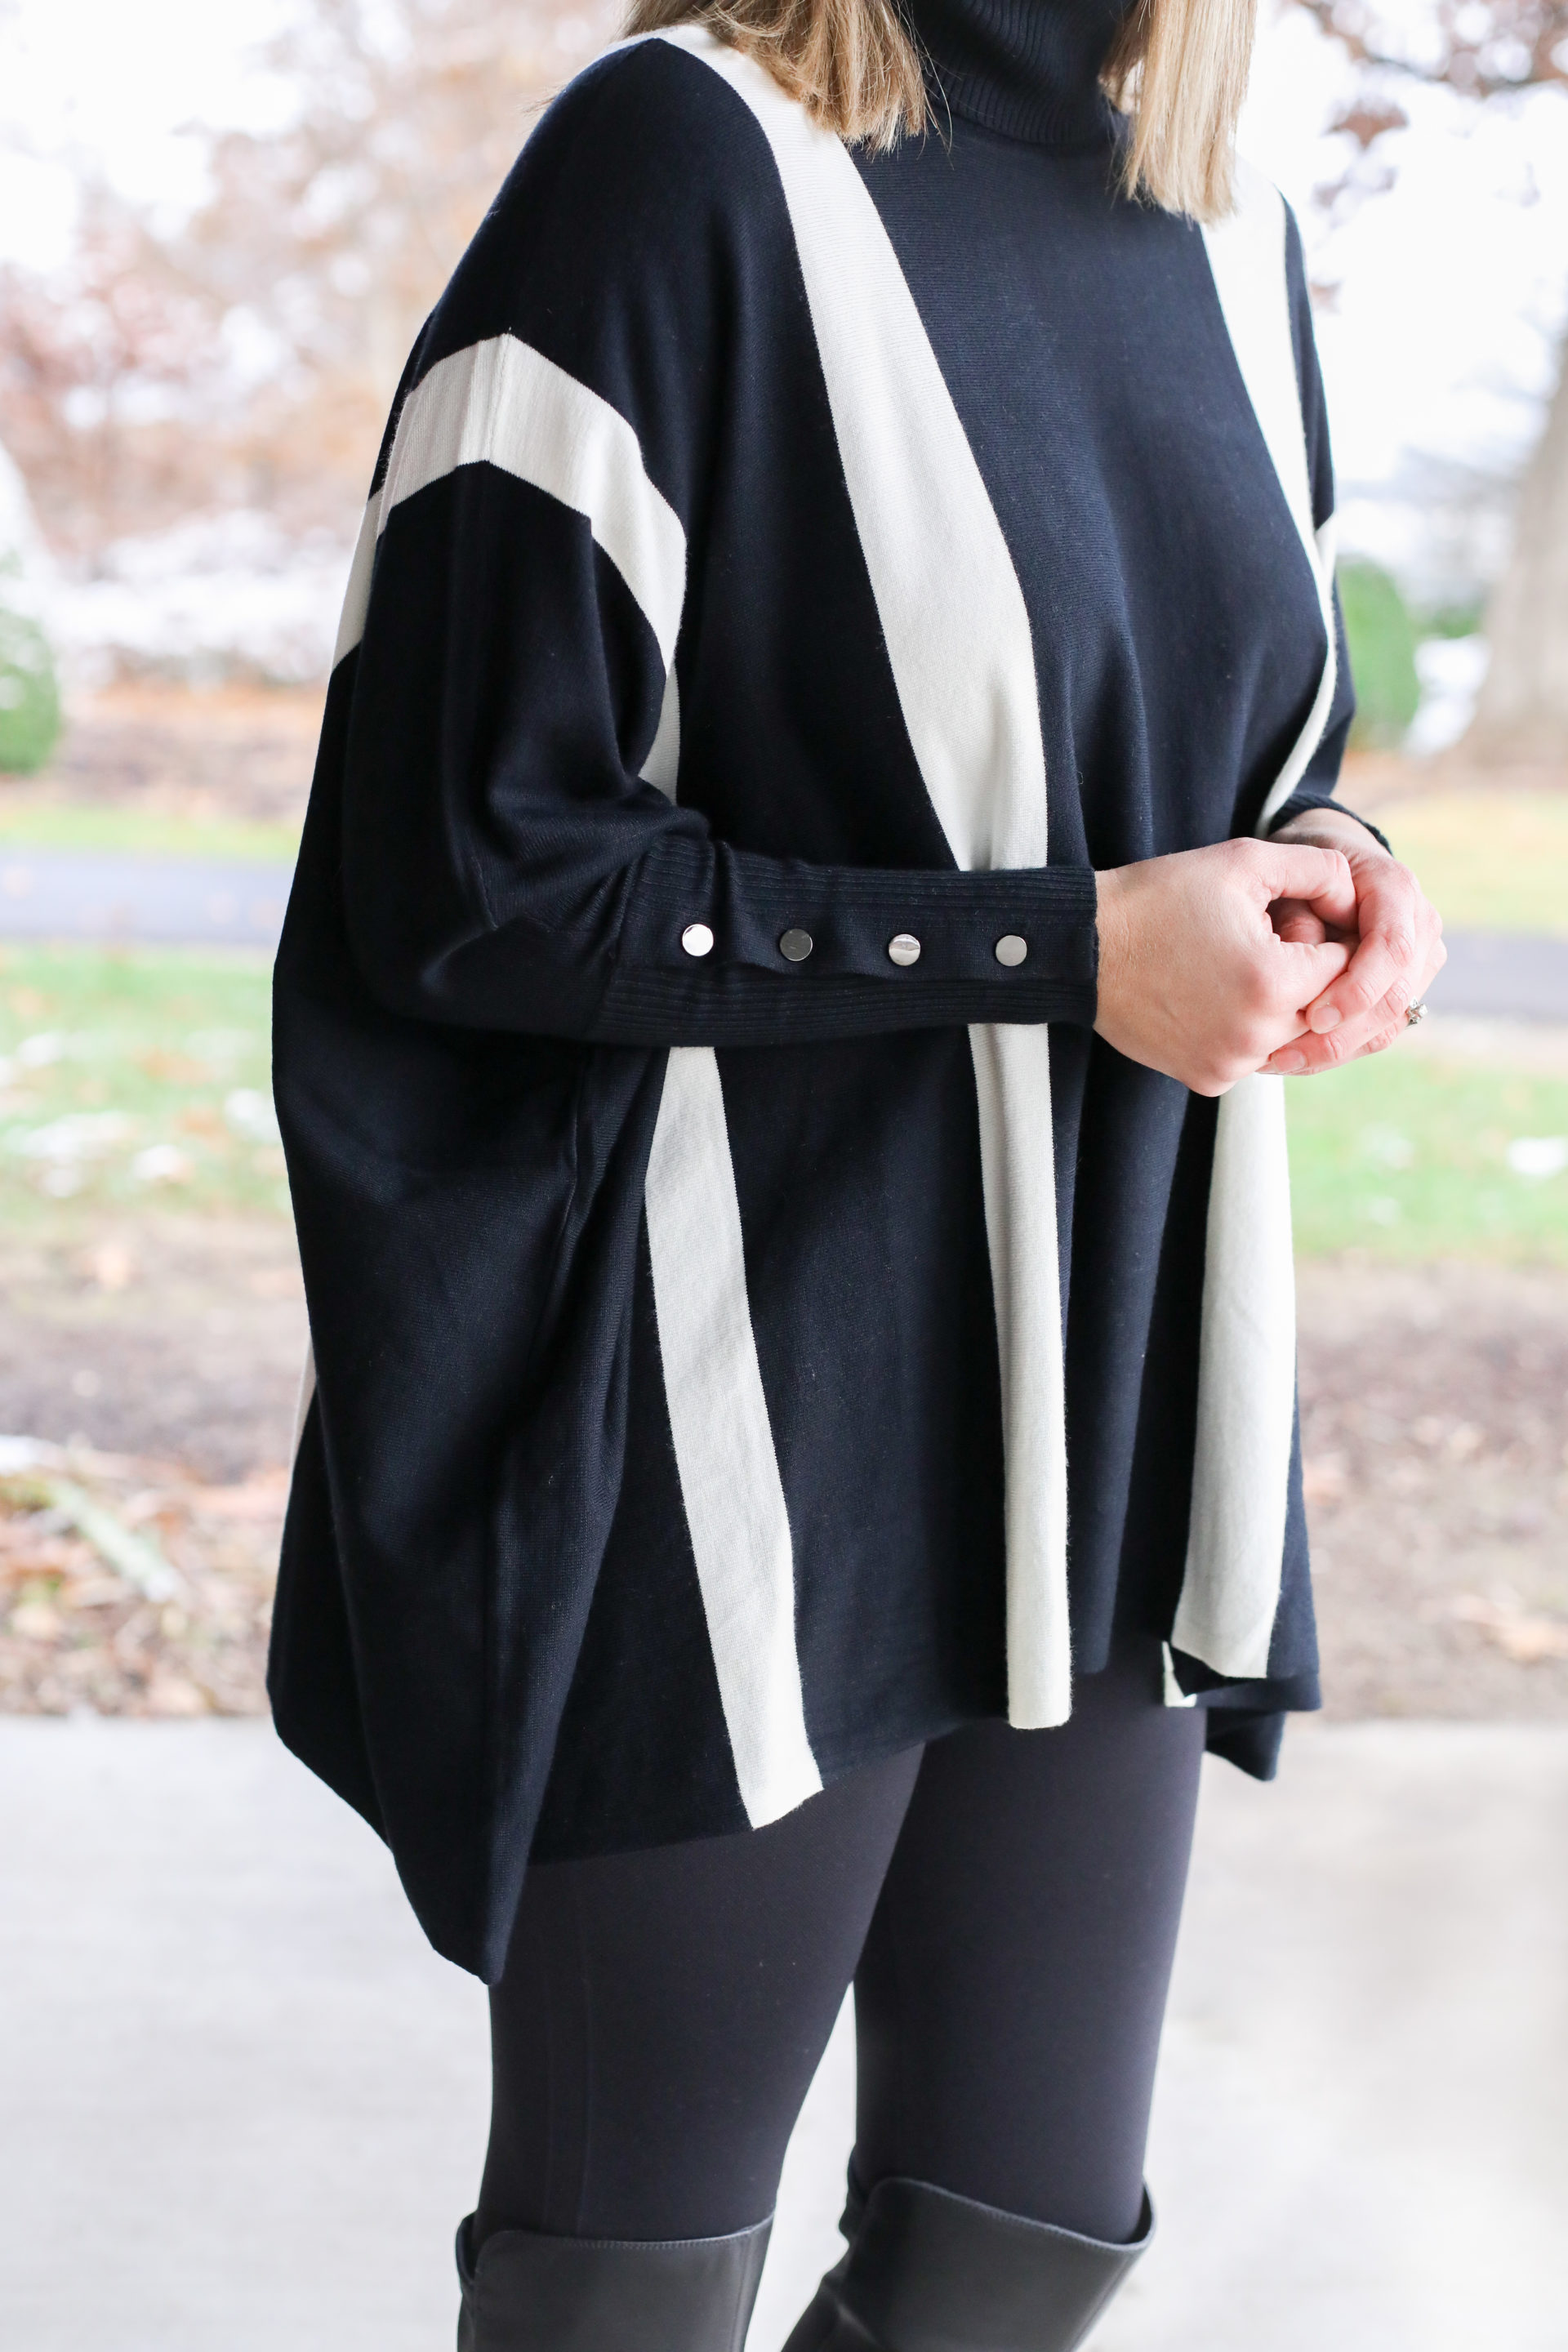 Long Tunic Tops To Wear With Leggings